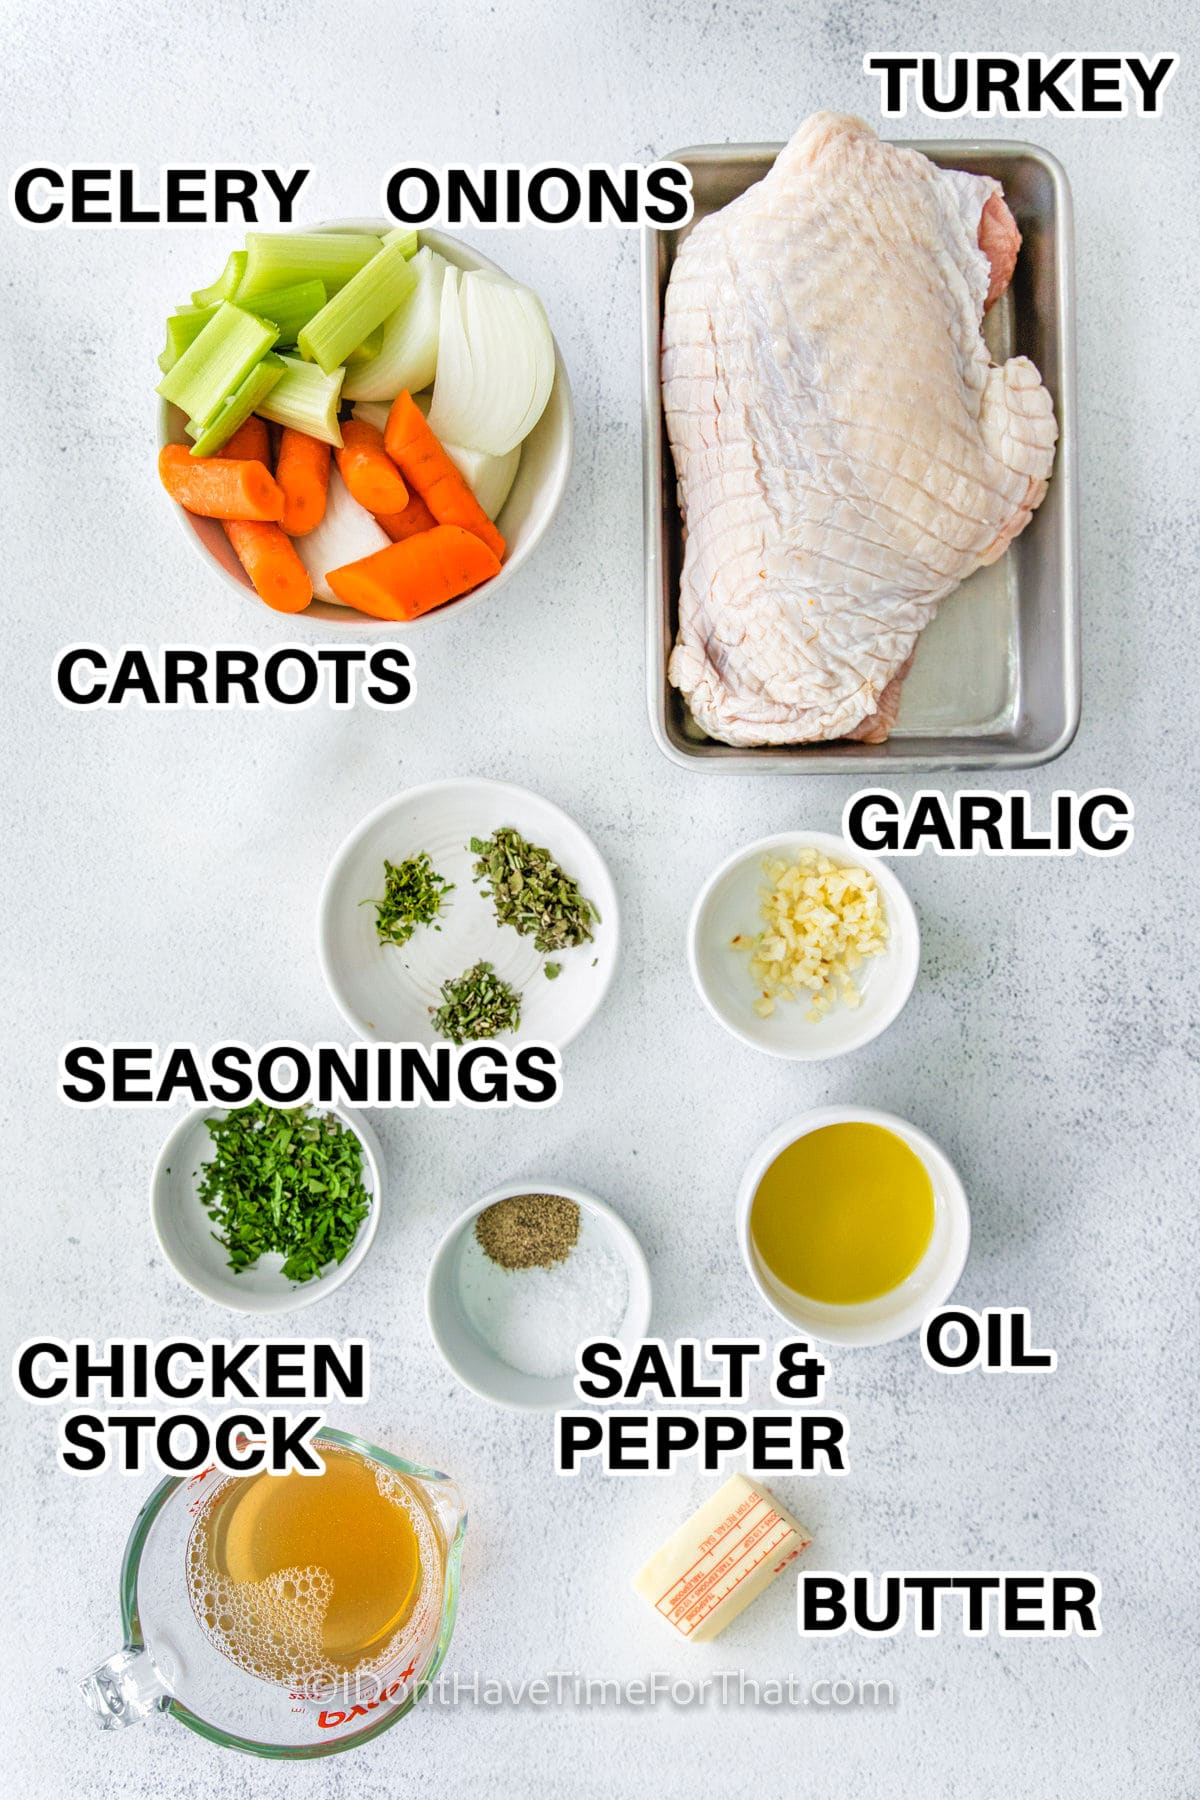 celery , onions , carrots, turkey, garlic, oil , butter , chicken stock and seasonings with labels to make Instant Pot Garlic and Herb Turkey Breast